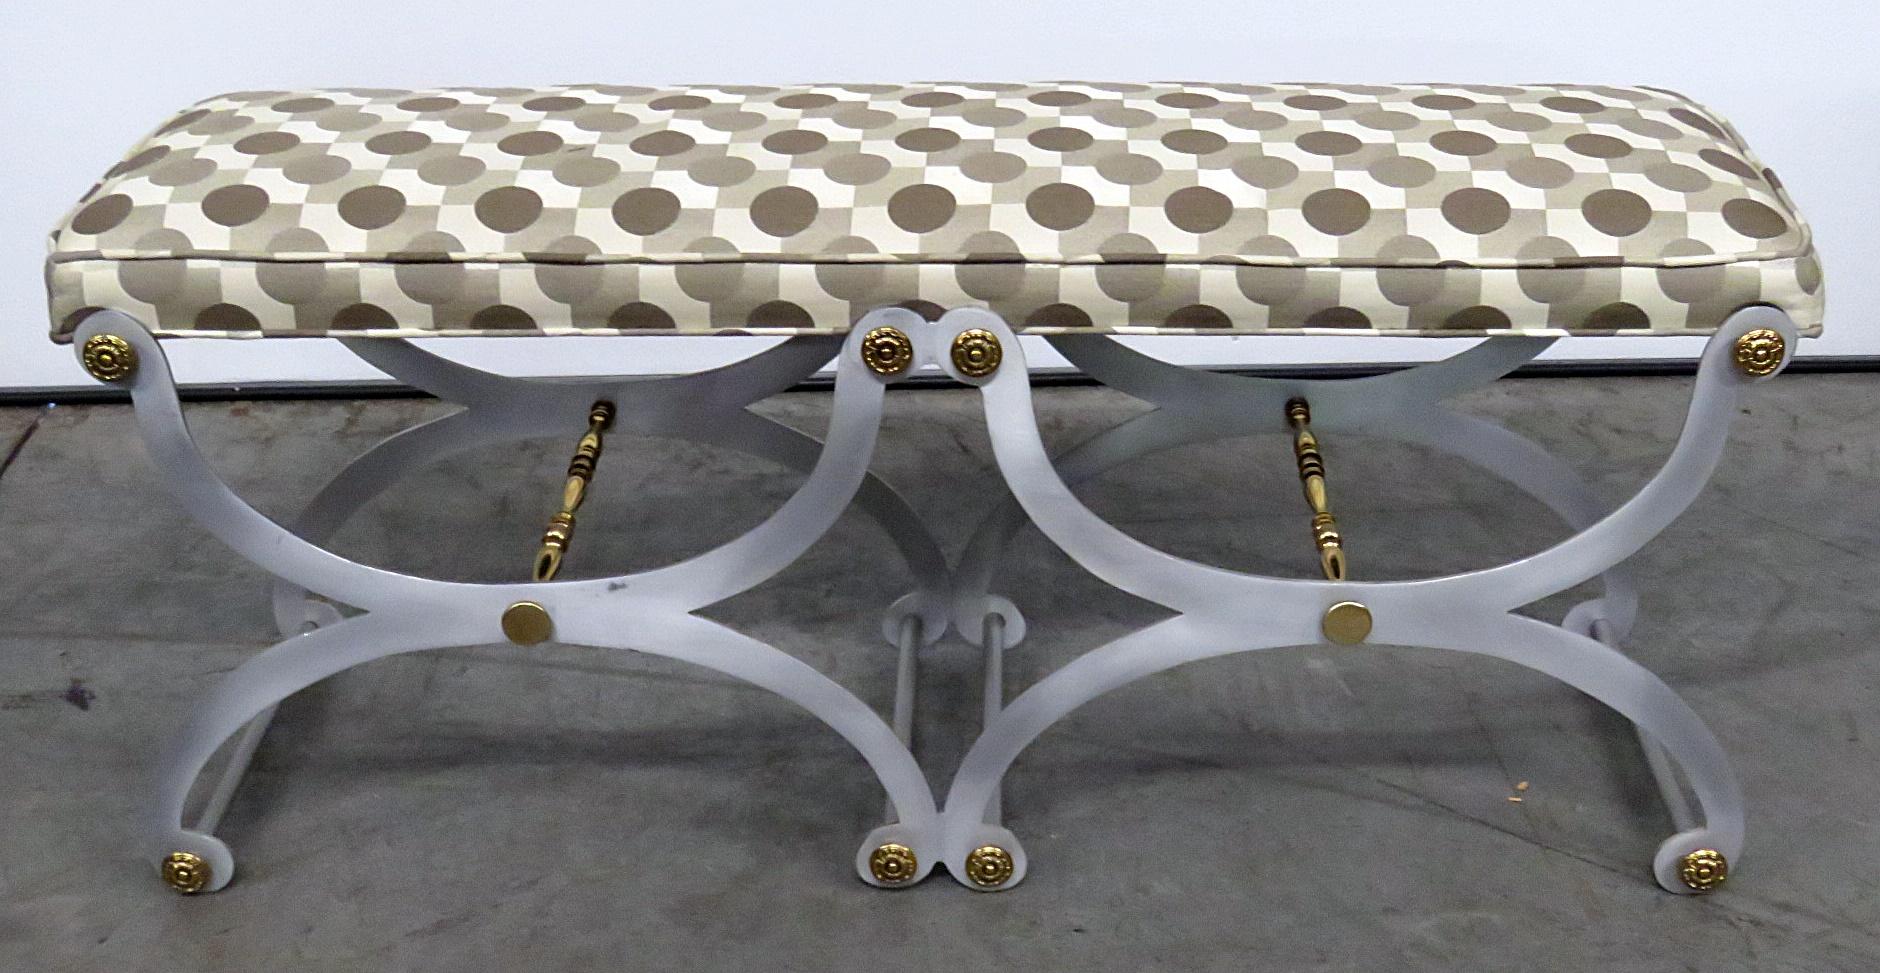 Directoire style bench with brass accents and Mid-Century Modern style upholstery. Most likely made by Maison Jansen but not marked. This is a special and unique piece that is very unique and rare. 